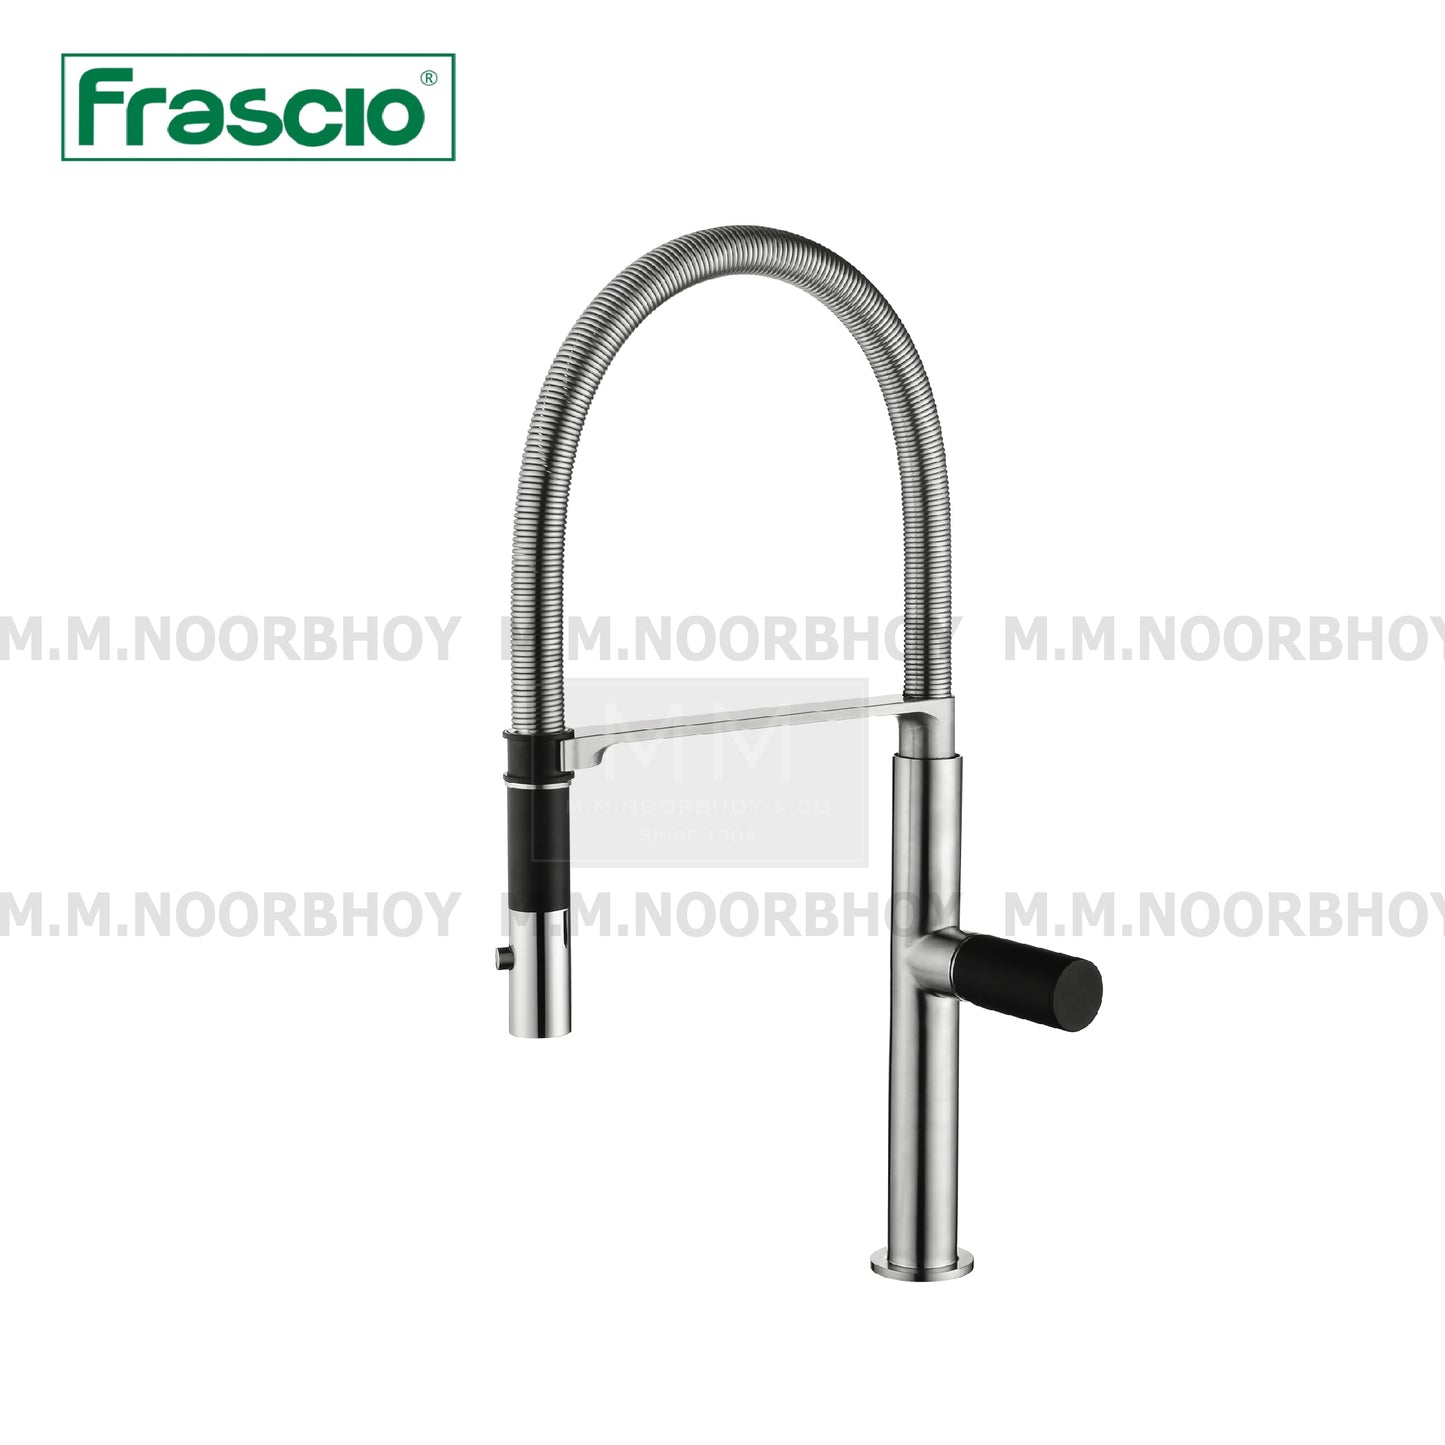 Frascio Single Lever Pull-out Sink Mixer Tap - FRA1059062CP